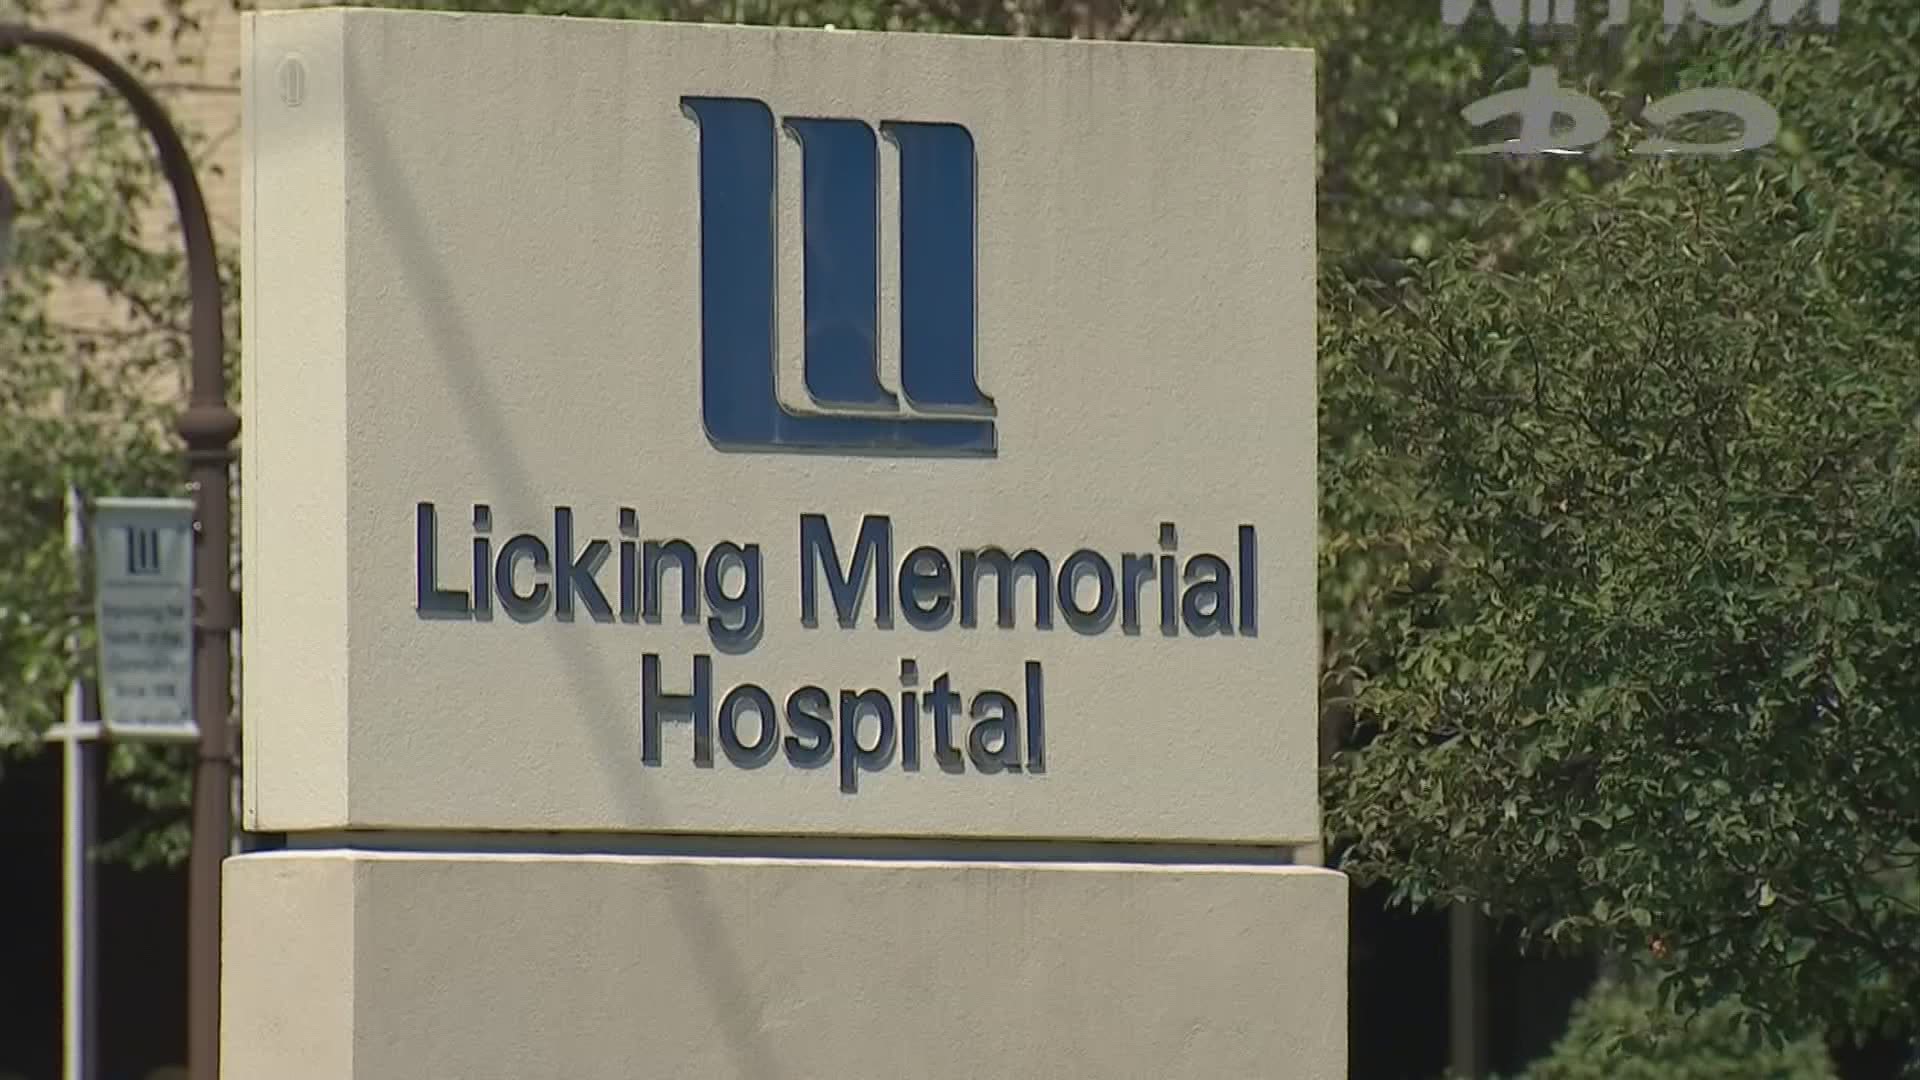 Licking Memorial Hospital suffered at $52 million loss earlier this year.